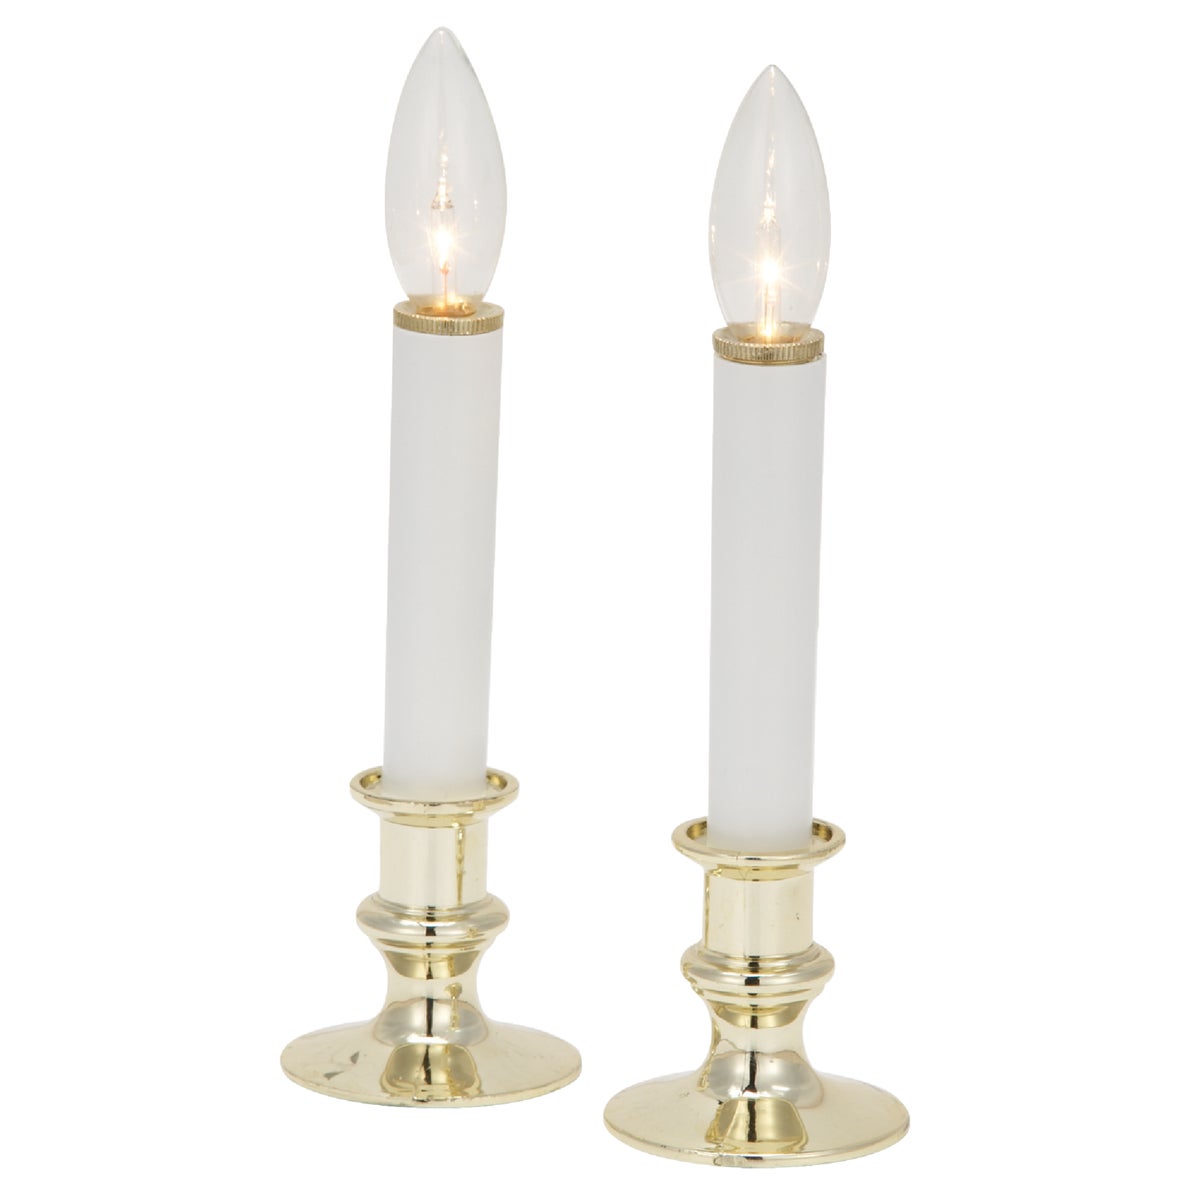 Item 901806, Plastic base battery-operated 2-pack candles.